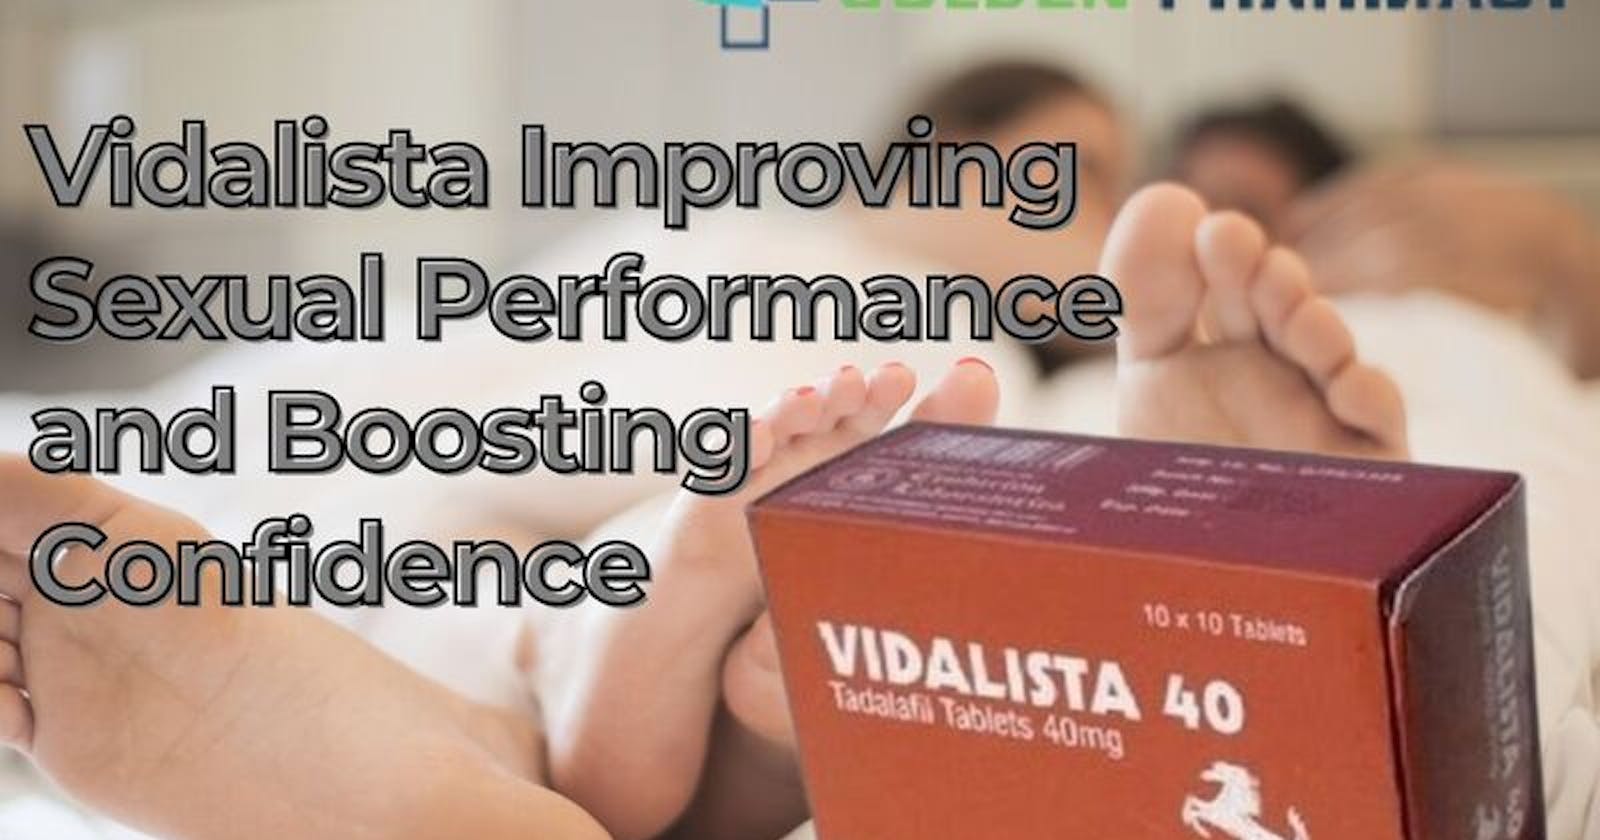 The Ultimate Guide to Vidalista 40mg: Dosage, Effectiveness, and Side Effects